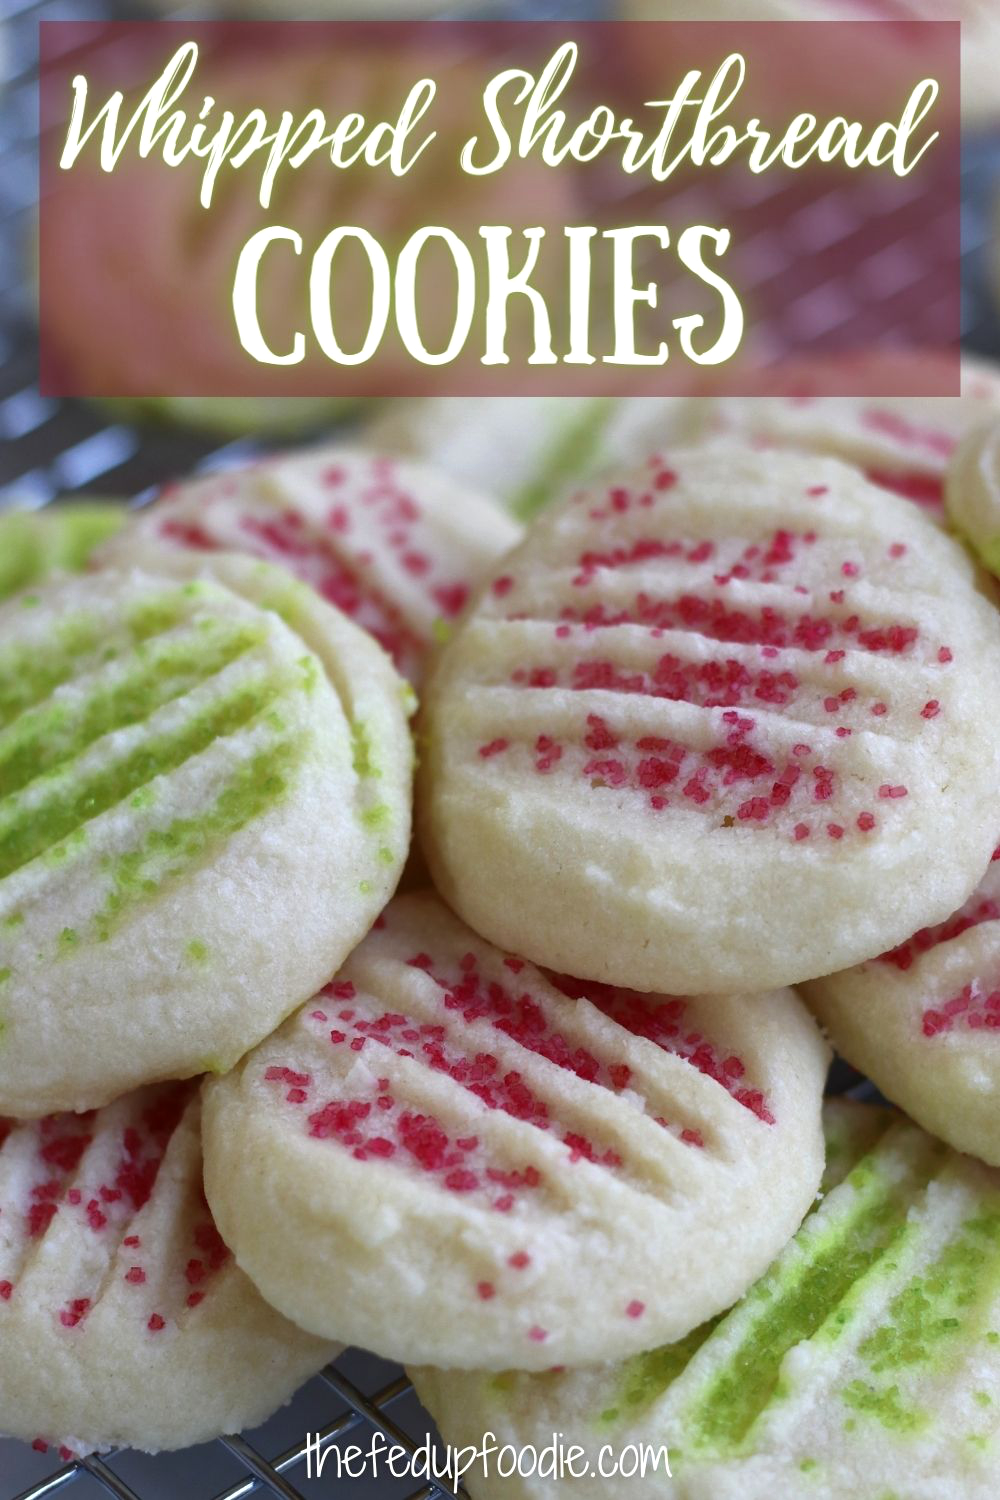 Whipped Shortbread Cookies recipe creates light and buttery cookies that literally melt in your mouth. Use your choice of peppermint, almond or pure vanilla extract for festive Christmas shortbread cookies. 
#WhippedShortbreadCookies #WhippedShortbread #WhippedShortbreadCookiesRecipe #WhippedShortbreadCookiesChristmas #MeltInYourMouthShortbreadCookies #ShortbreadCookieRecipeChristmas 